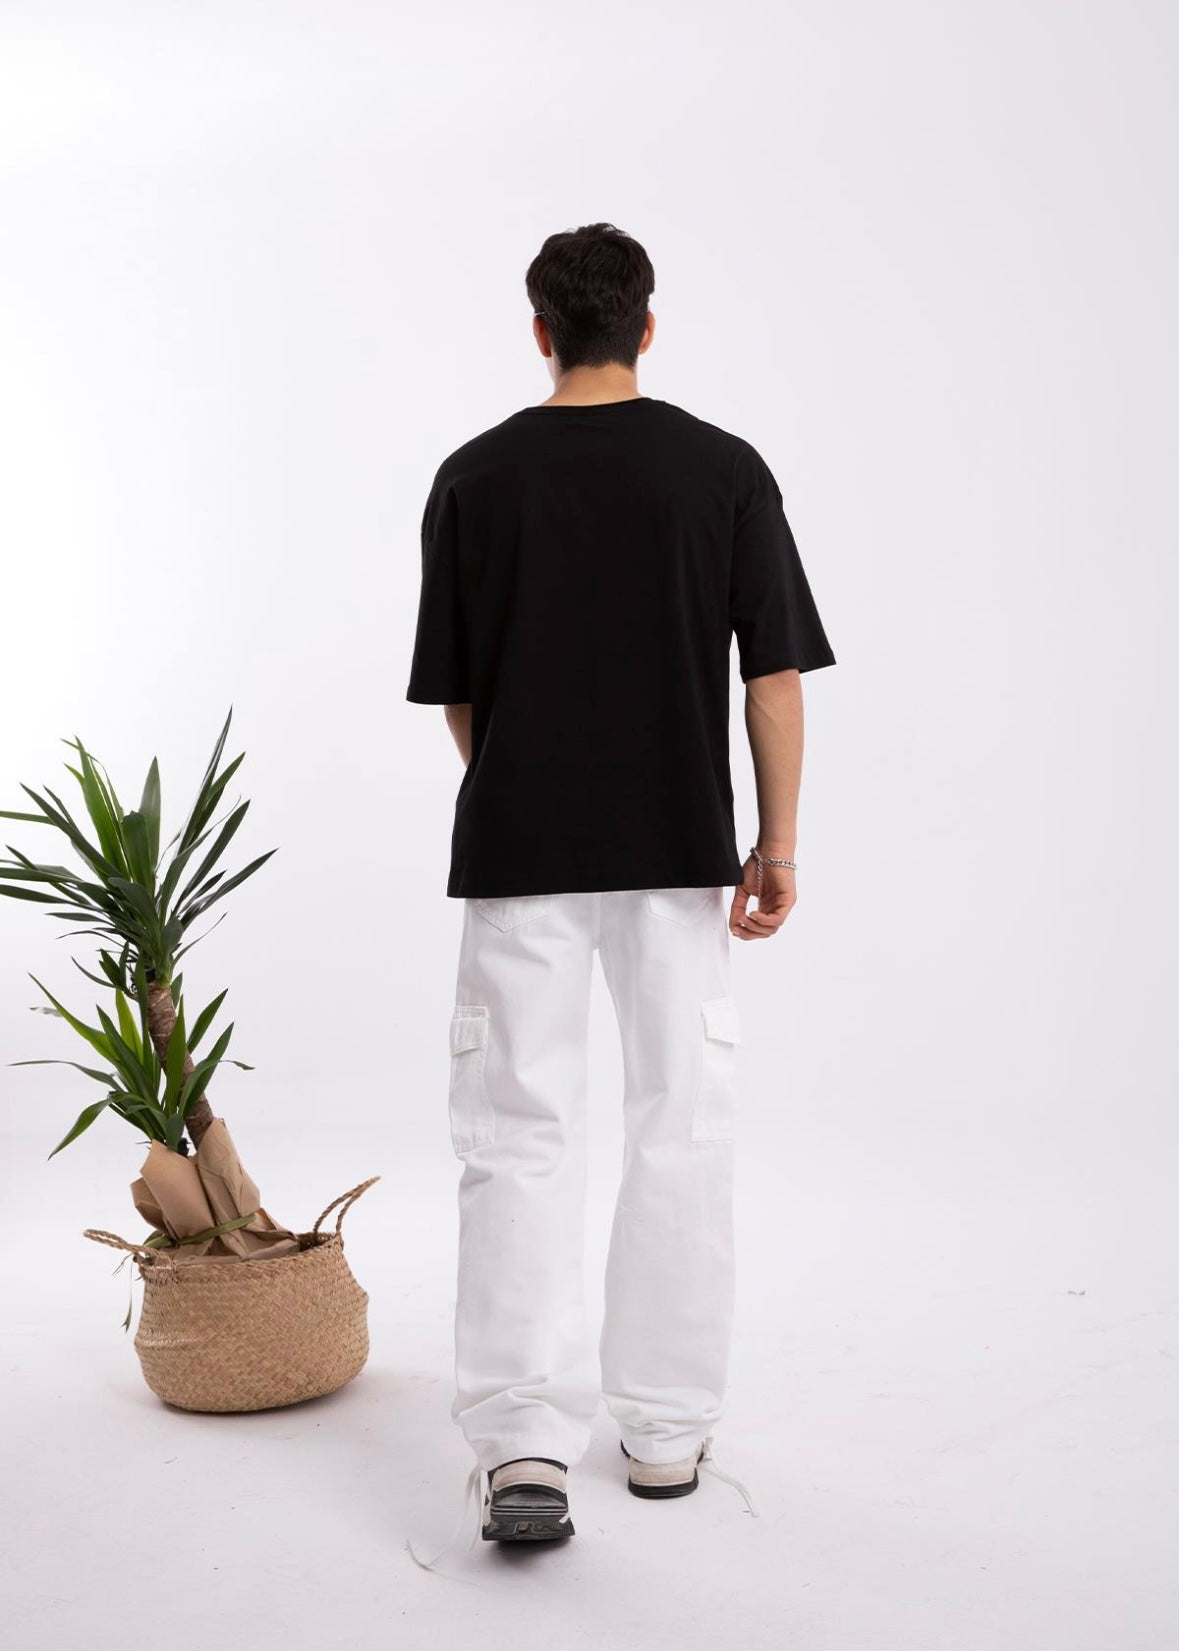 White Baggy Adjustable Pants - Clothing Lab